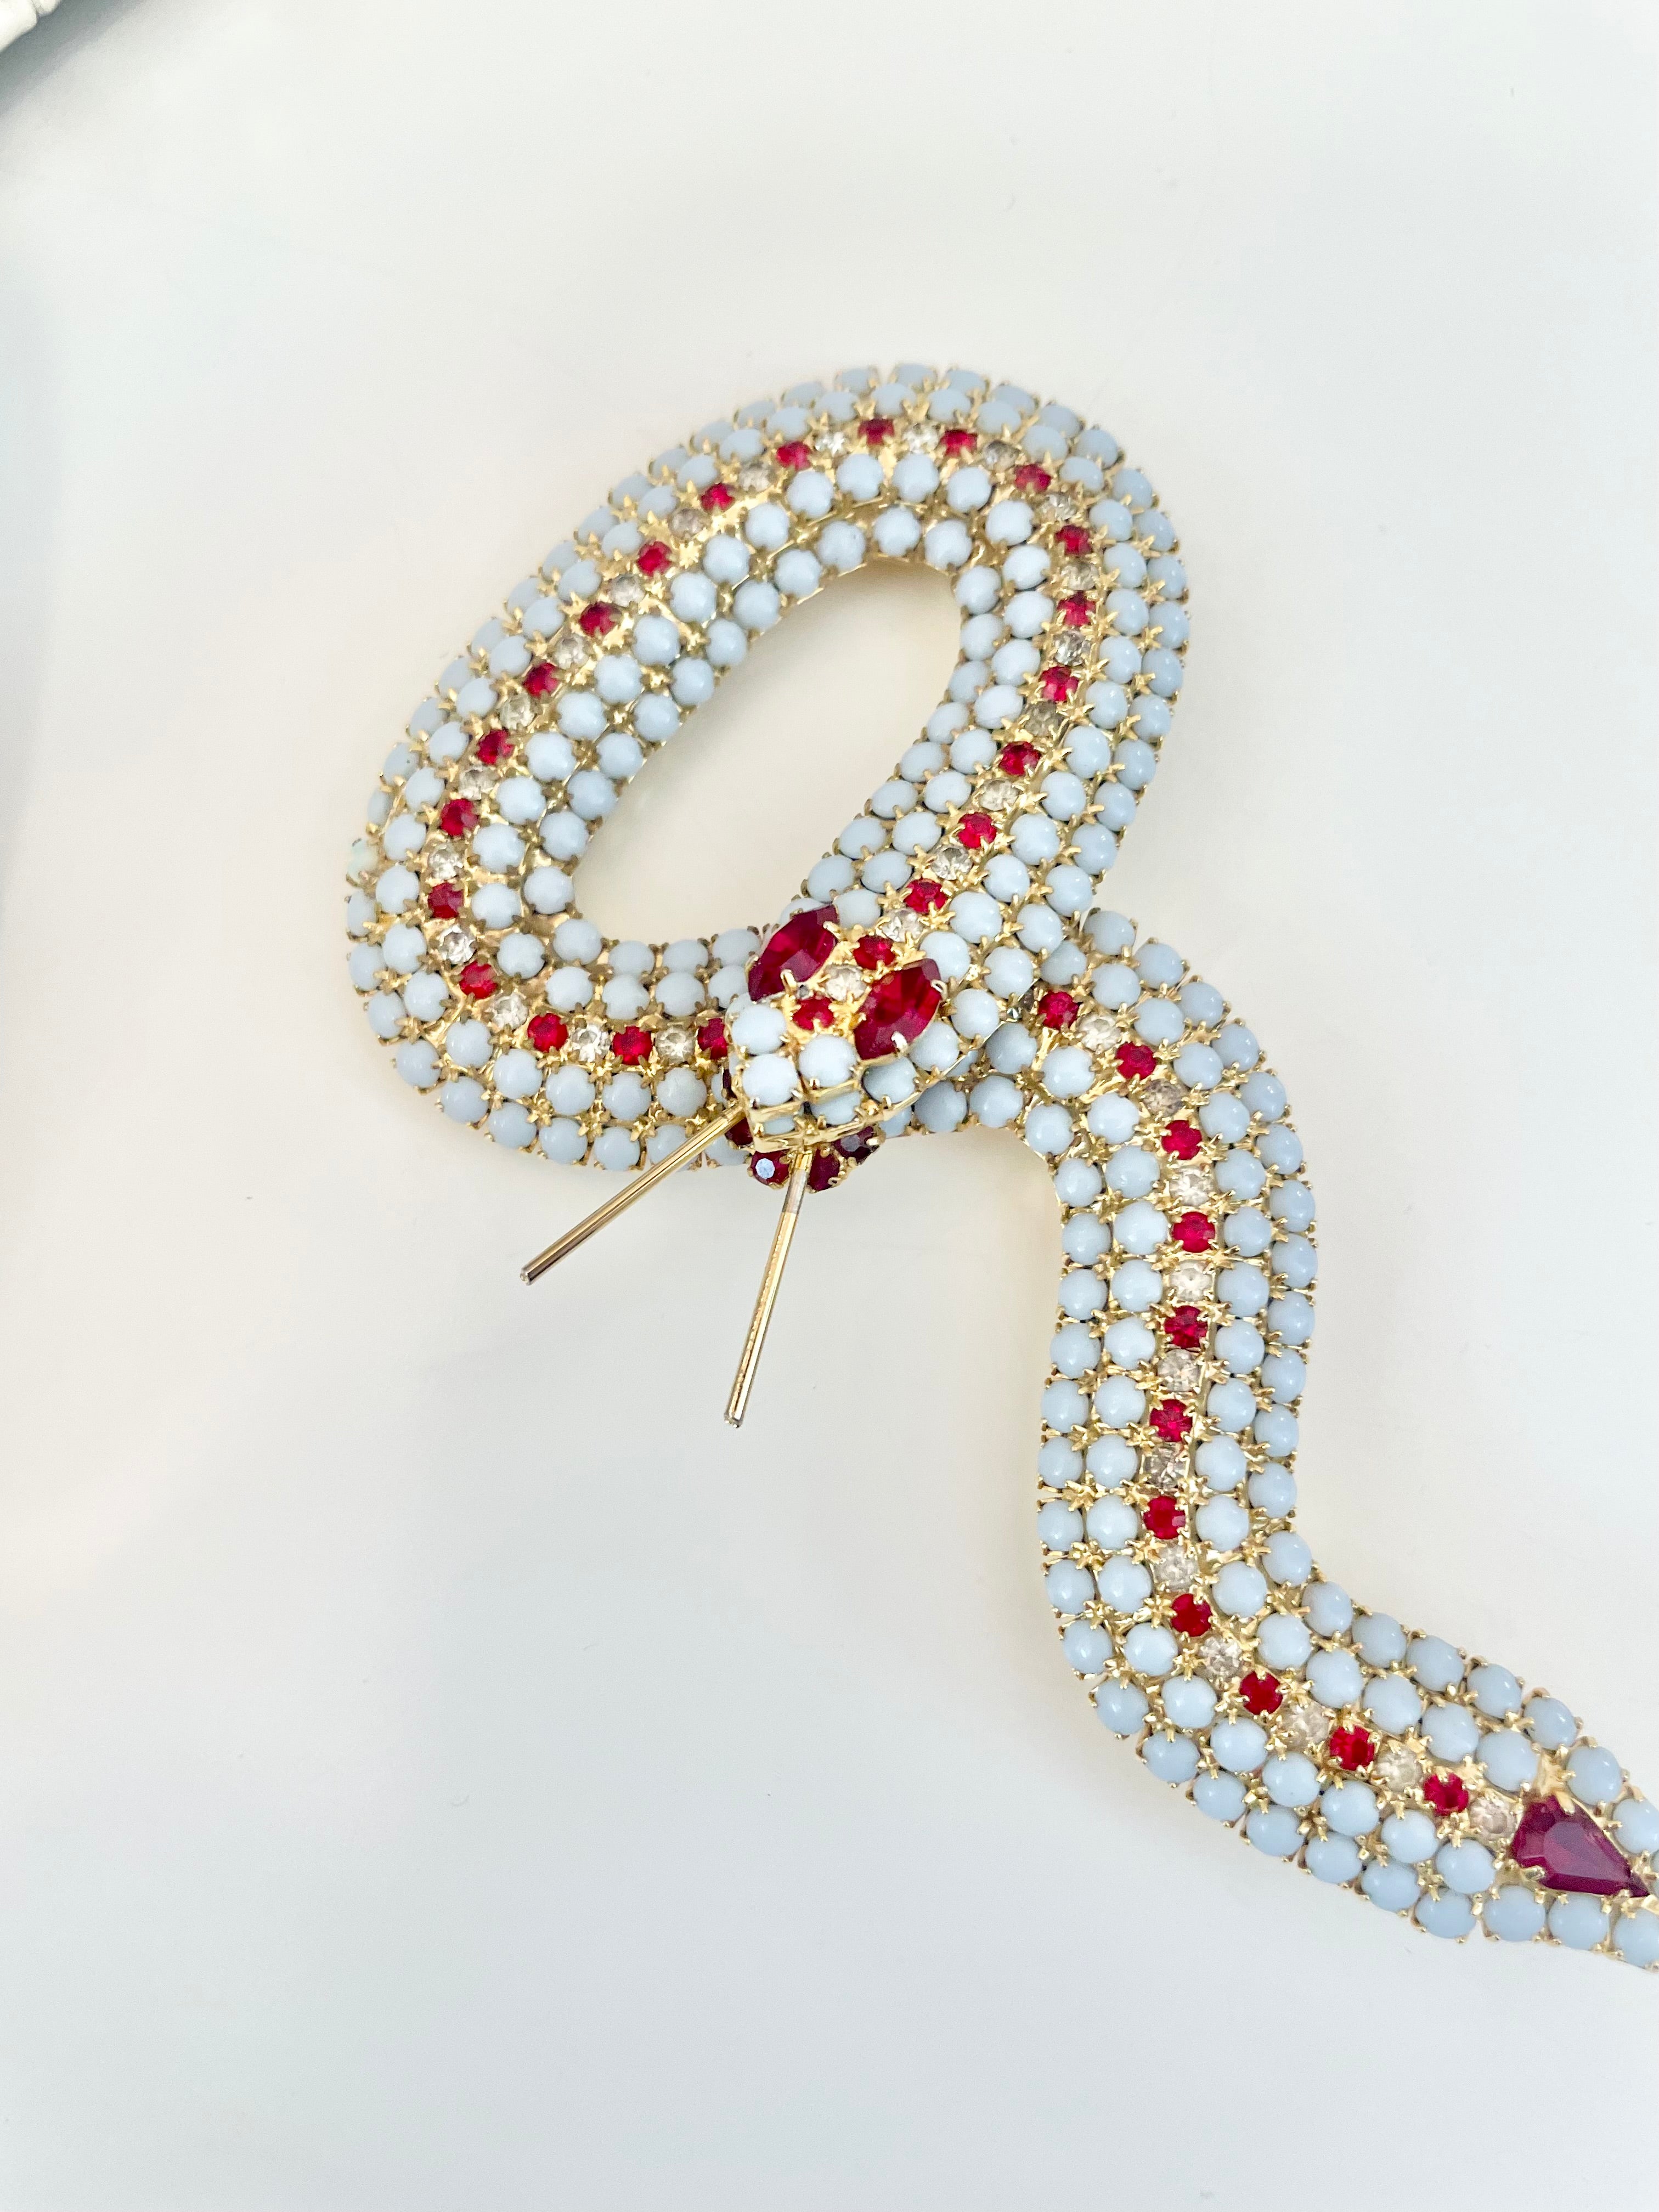 Absolutely stunning snake figural brooch... dramatic, and so elegant!